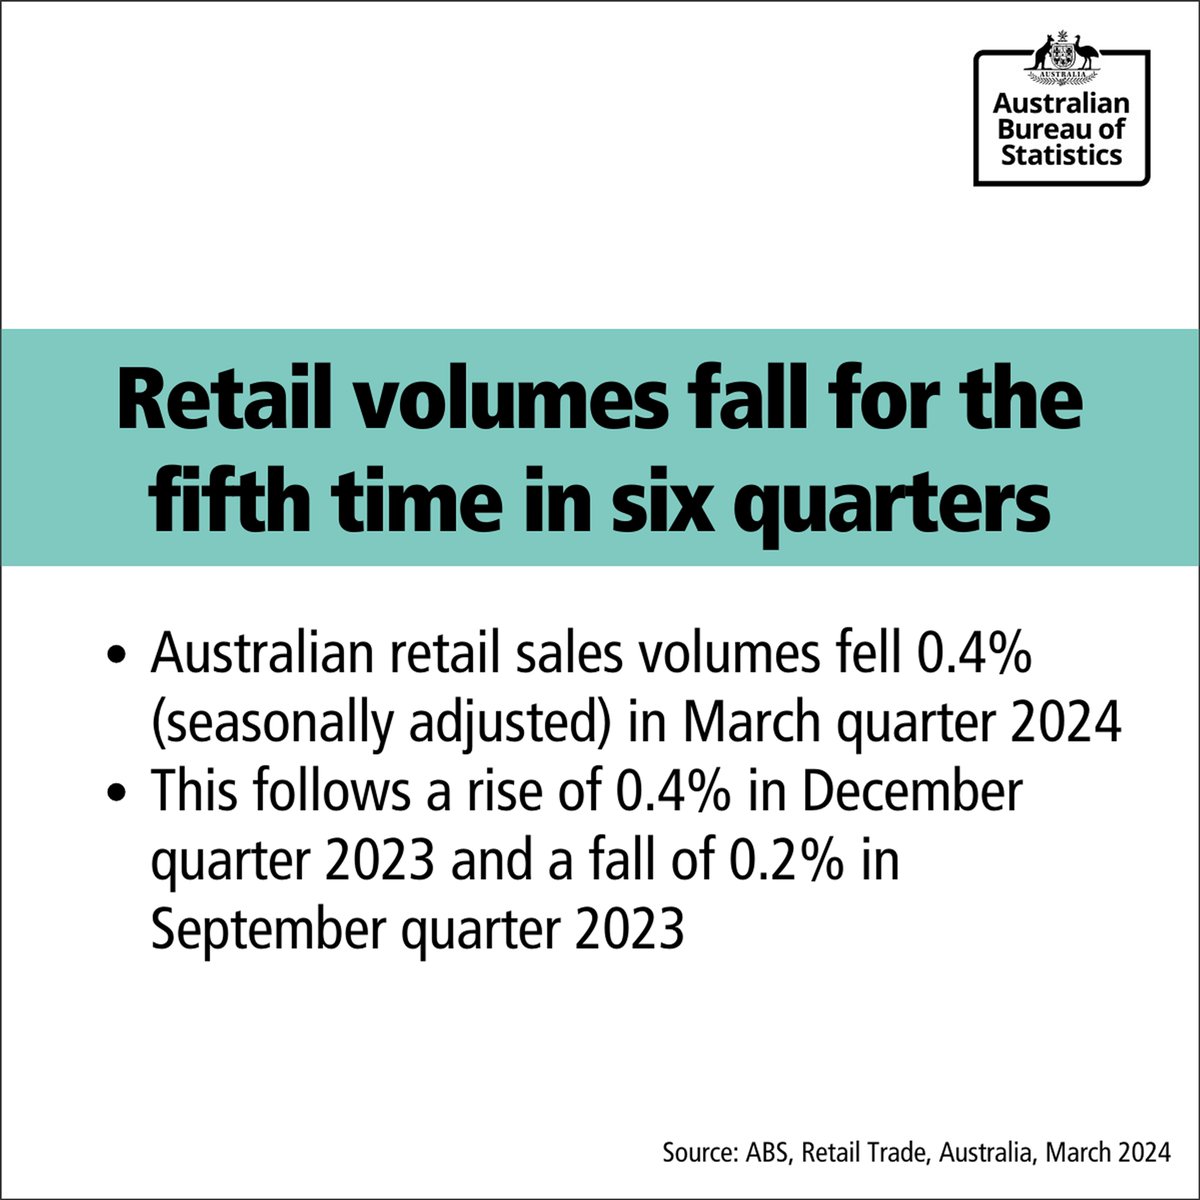 “Retail sales volumes fell for the fifth time in the past six quarters as consumers cut back on buying large household items such as furniture and electronic goods,' Ben Dorber, ABS head of retail statistics Visit nuvi.me/whj1o7